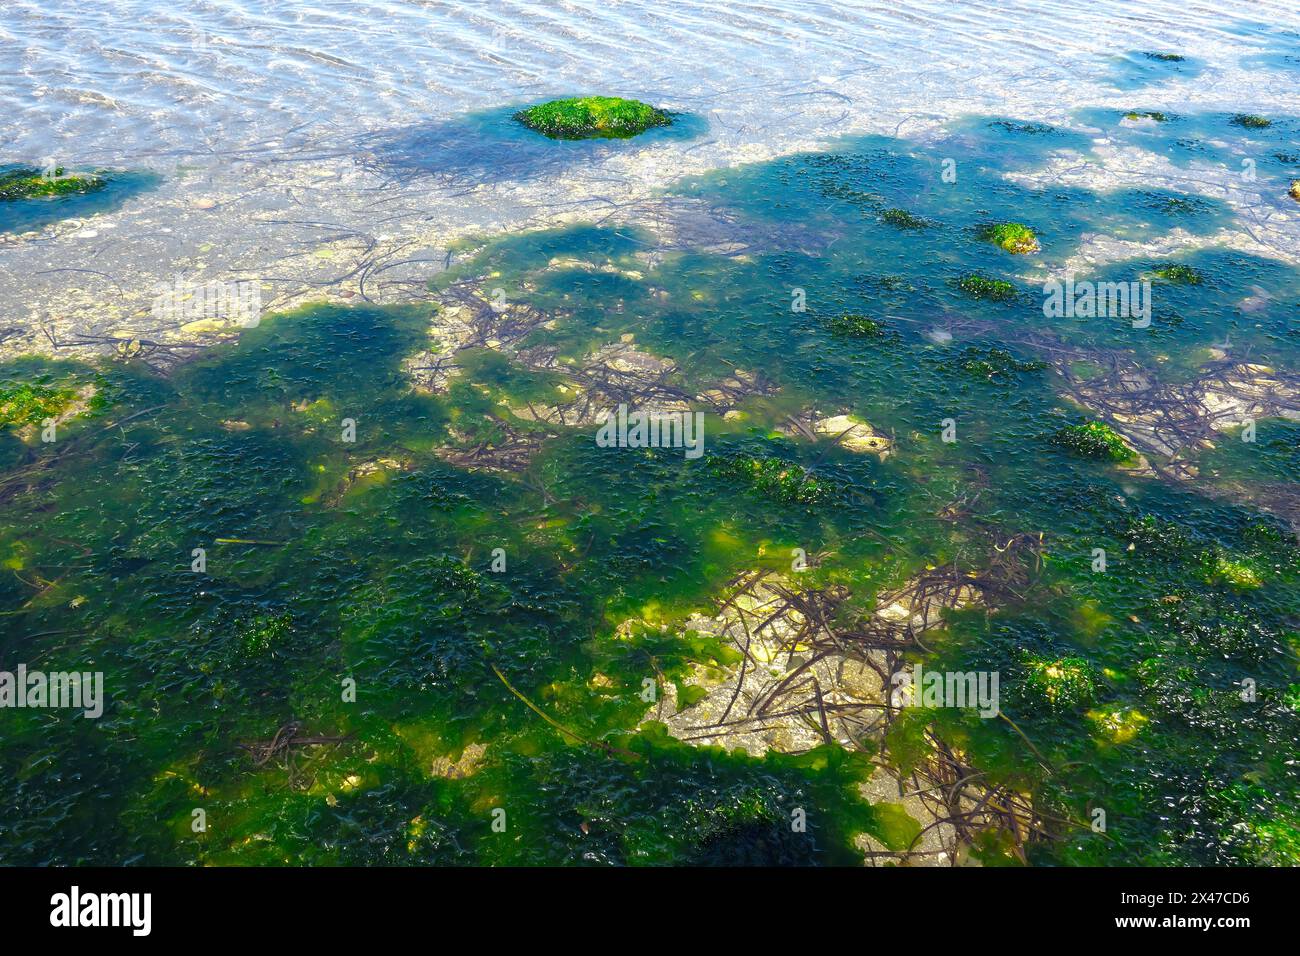 Seaweed, Common Green Algea, Sea Lettuce (Ulva lactuca) - found growing in shallow water during low tide at Crescent Beach, B. C., Canada. Stock Photo